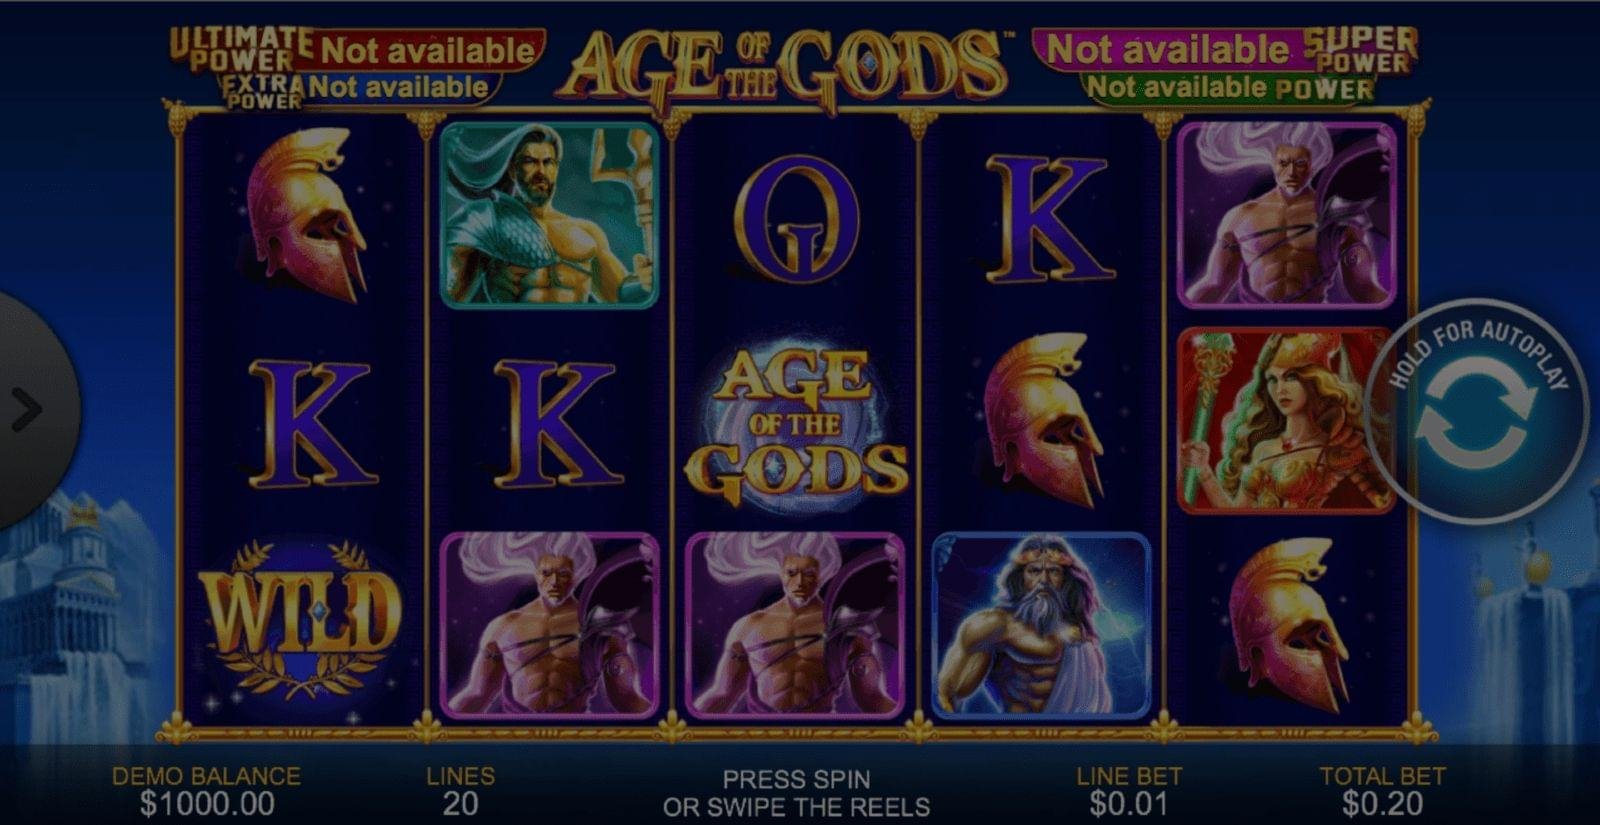 Age of the Gods demo